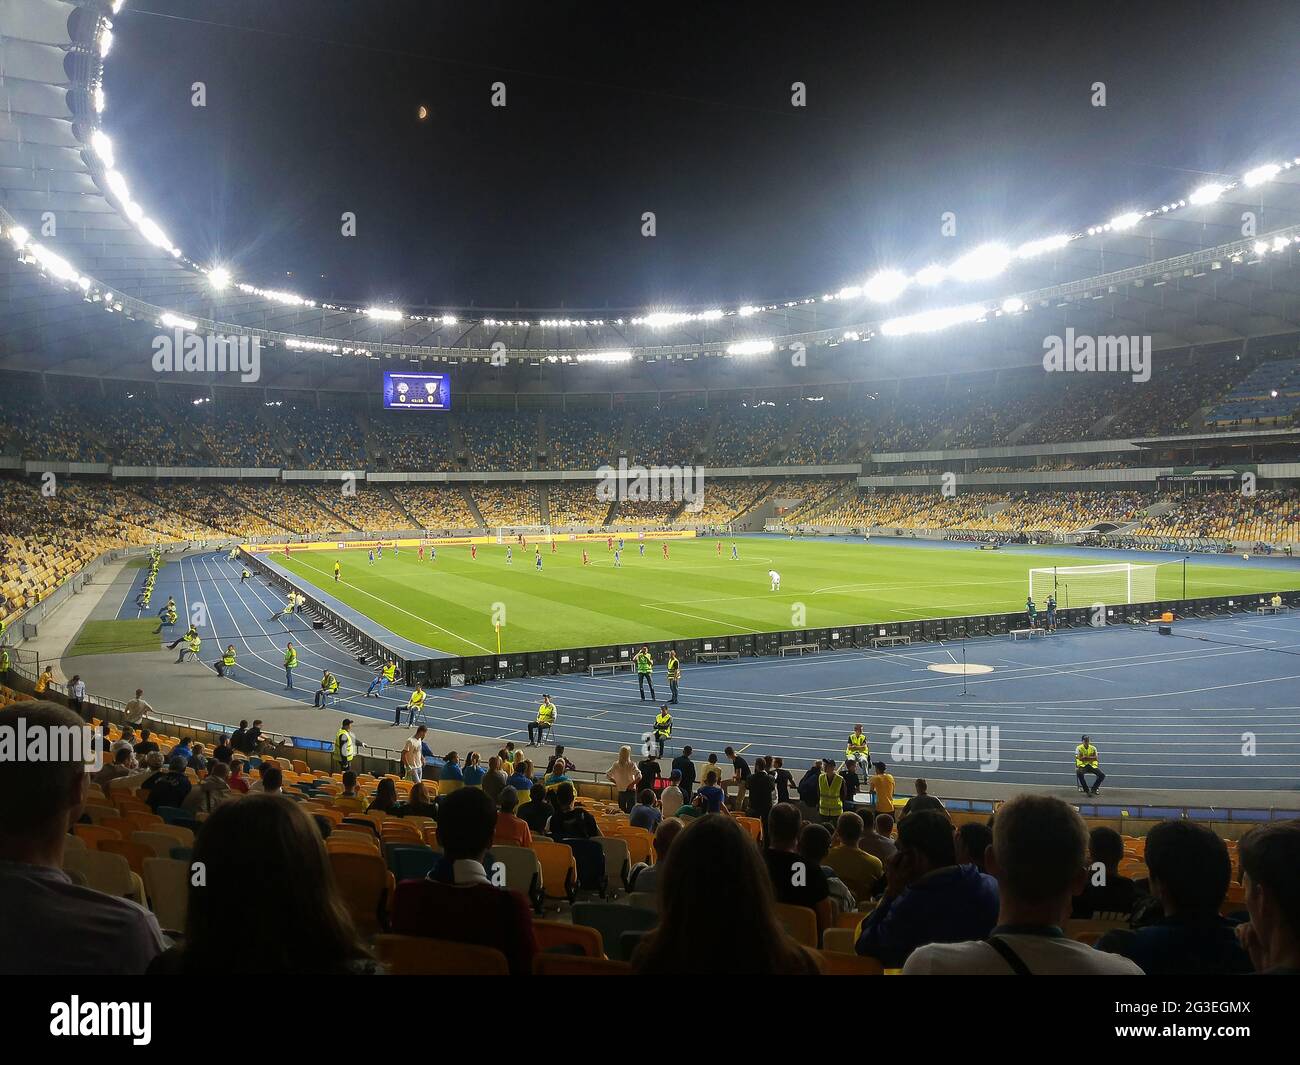 Football competition in a large stadium in the evening with a bright highlight removed from the stands Stock Photo